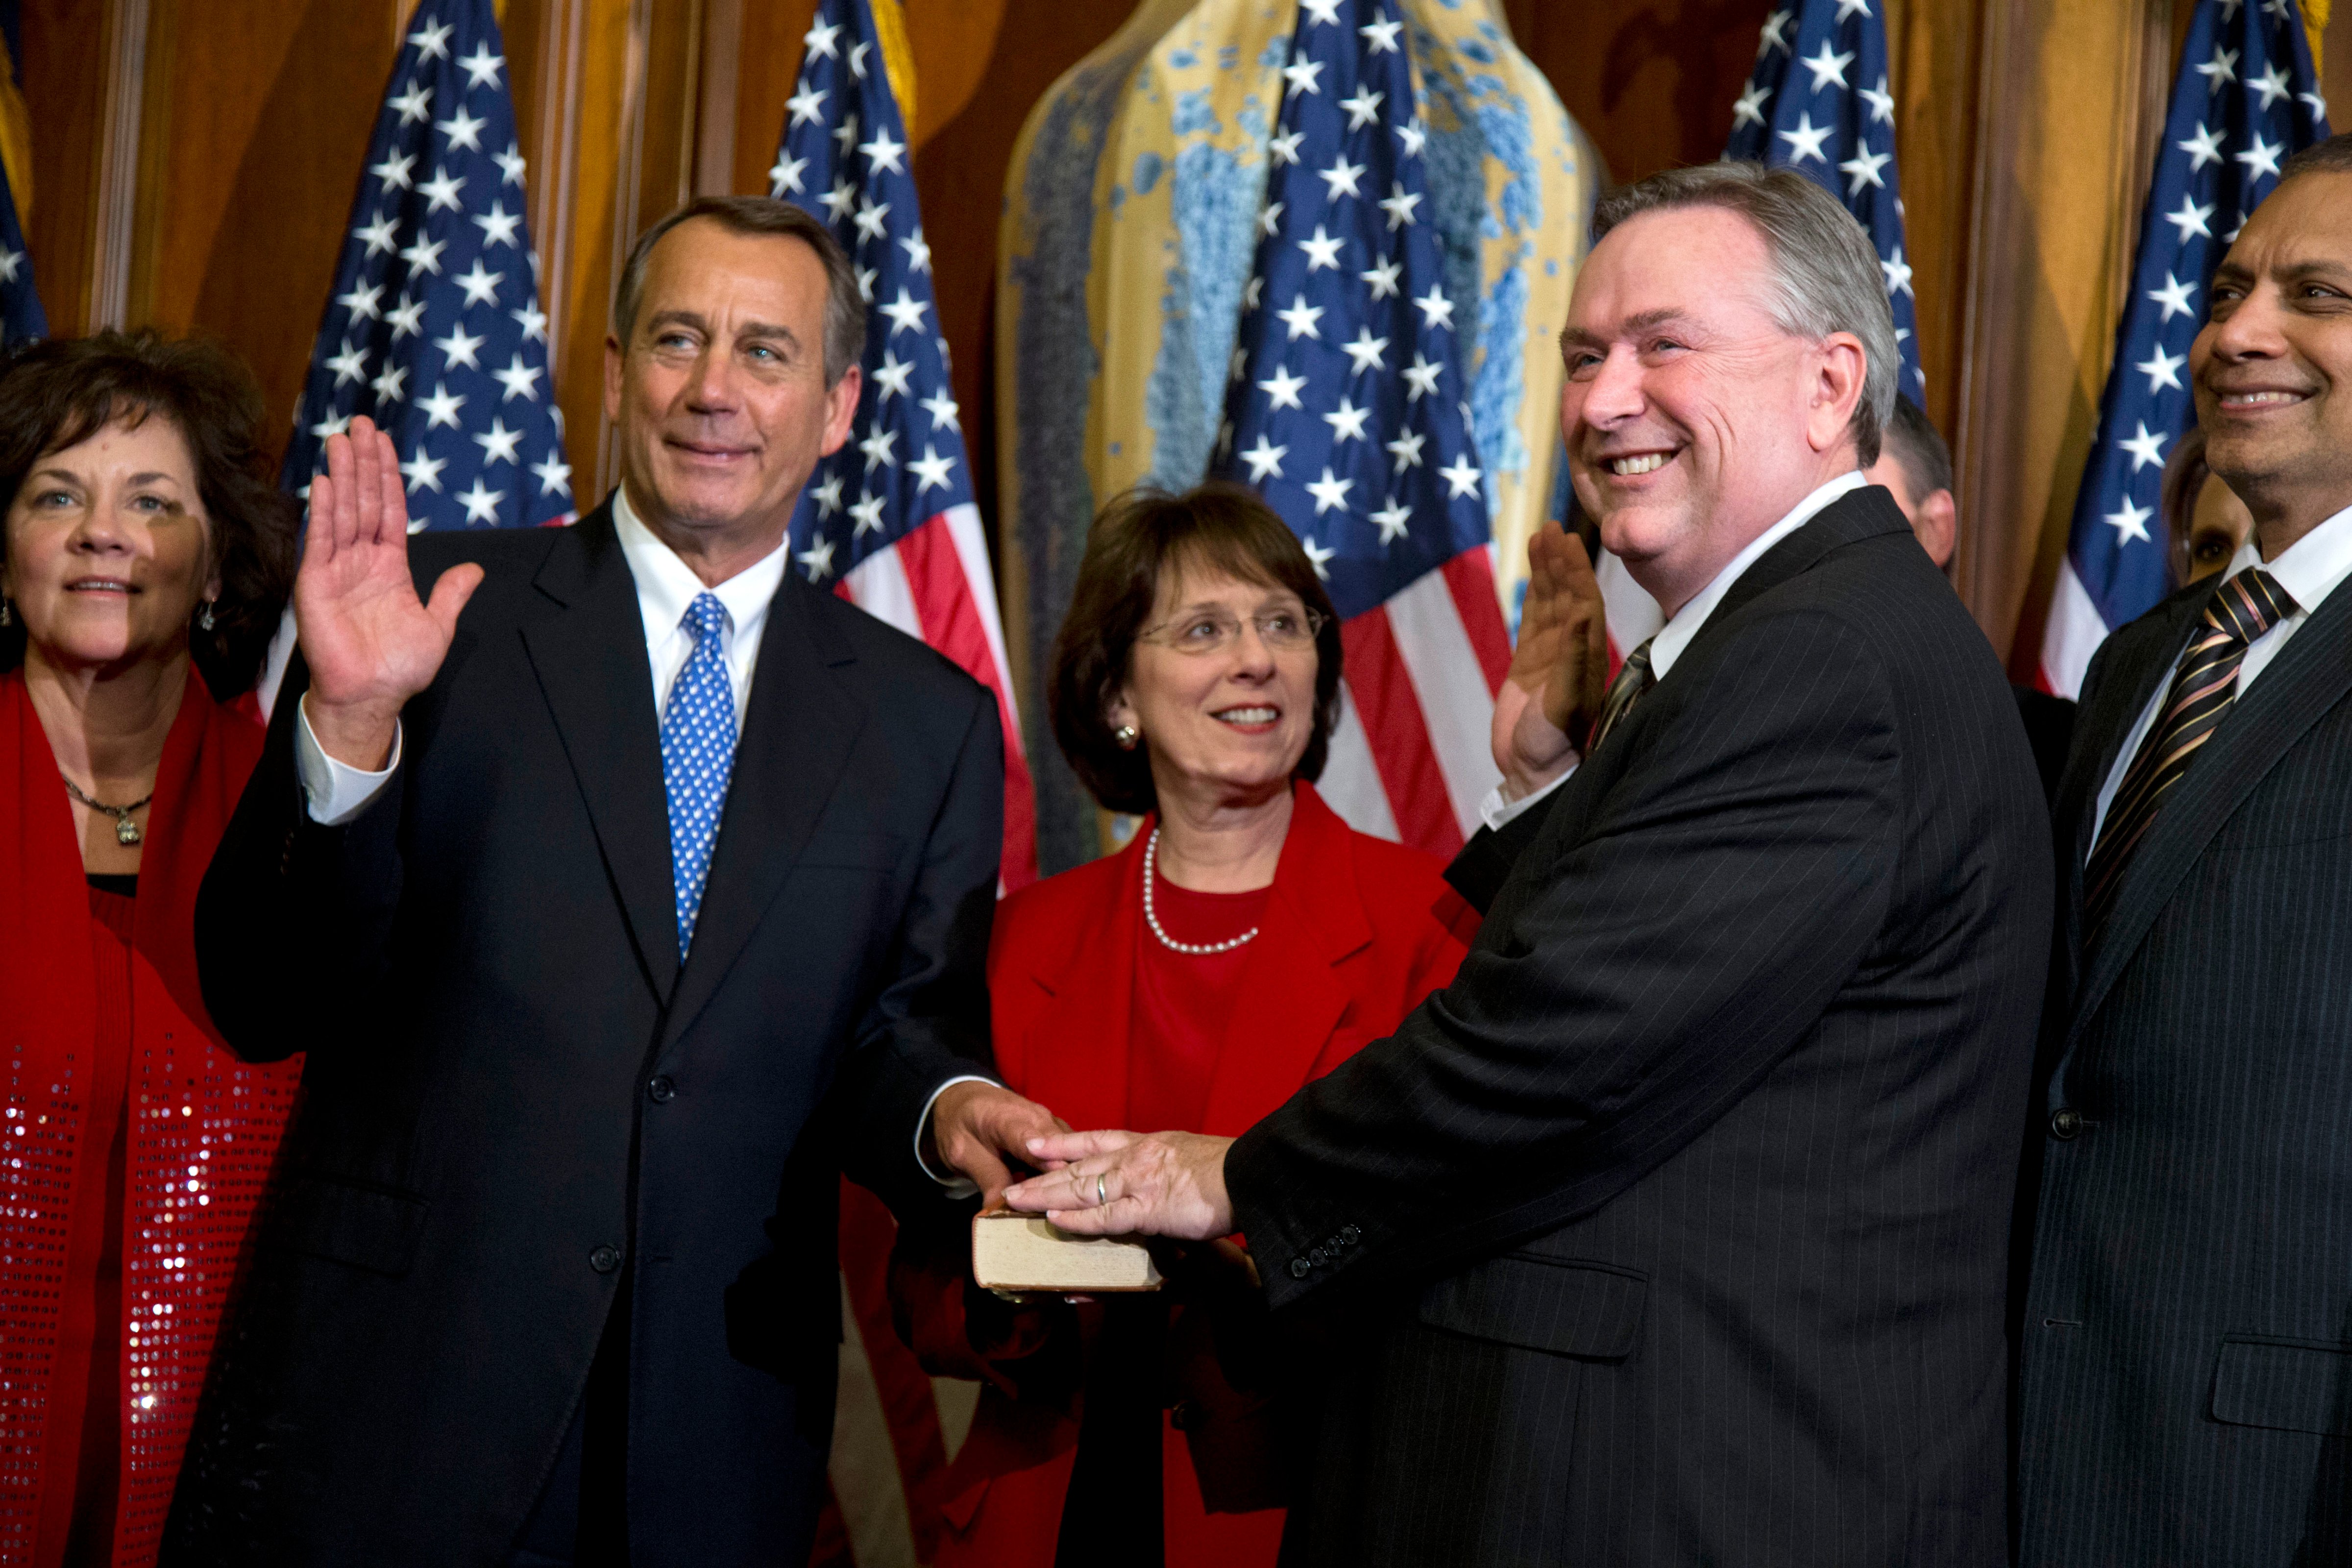 Rep. Steve Stockman, R-Texas, second from right, participates in a mock swearing-in ceremony with Speaker of the House Rep. John Boehner, R-Ohio, for the 113th Congress in Washington, Jan. 3, 2013. (Evan Vucc—AP)